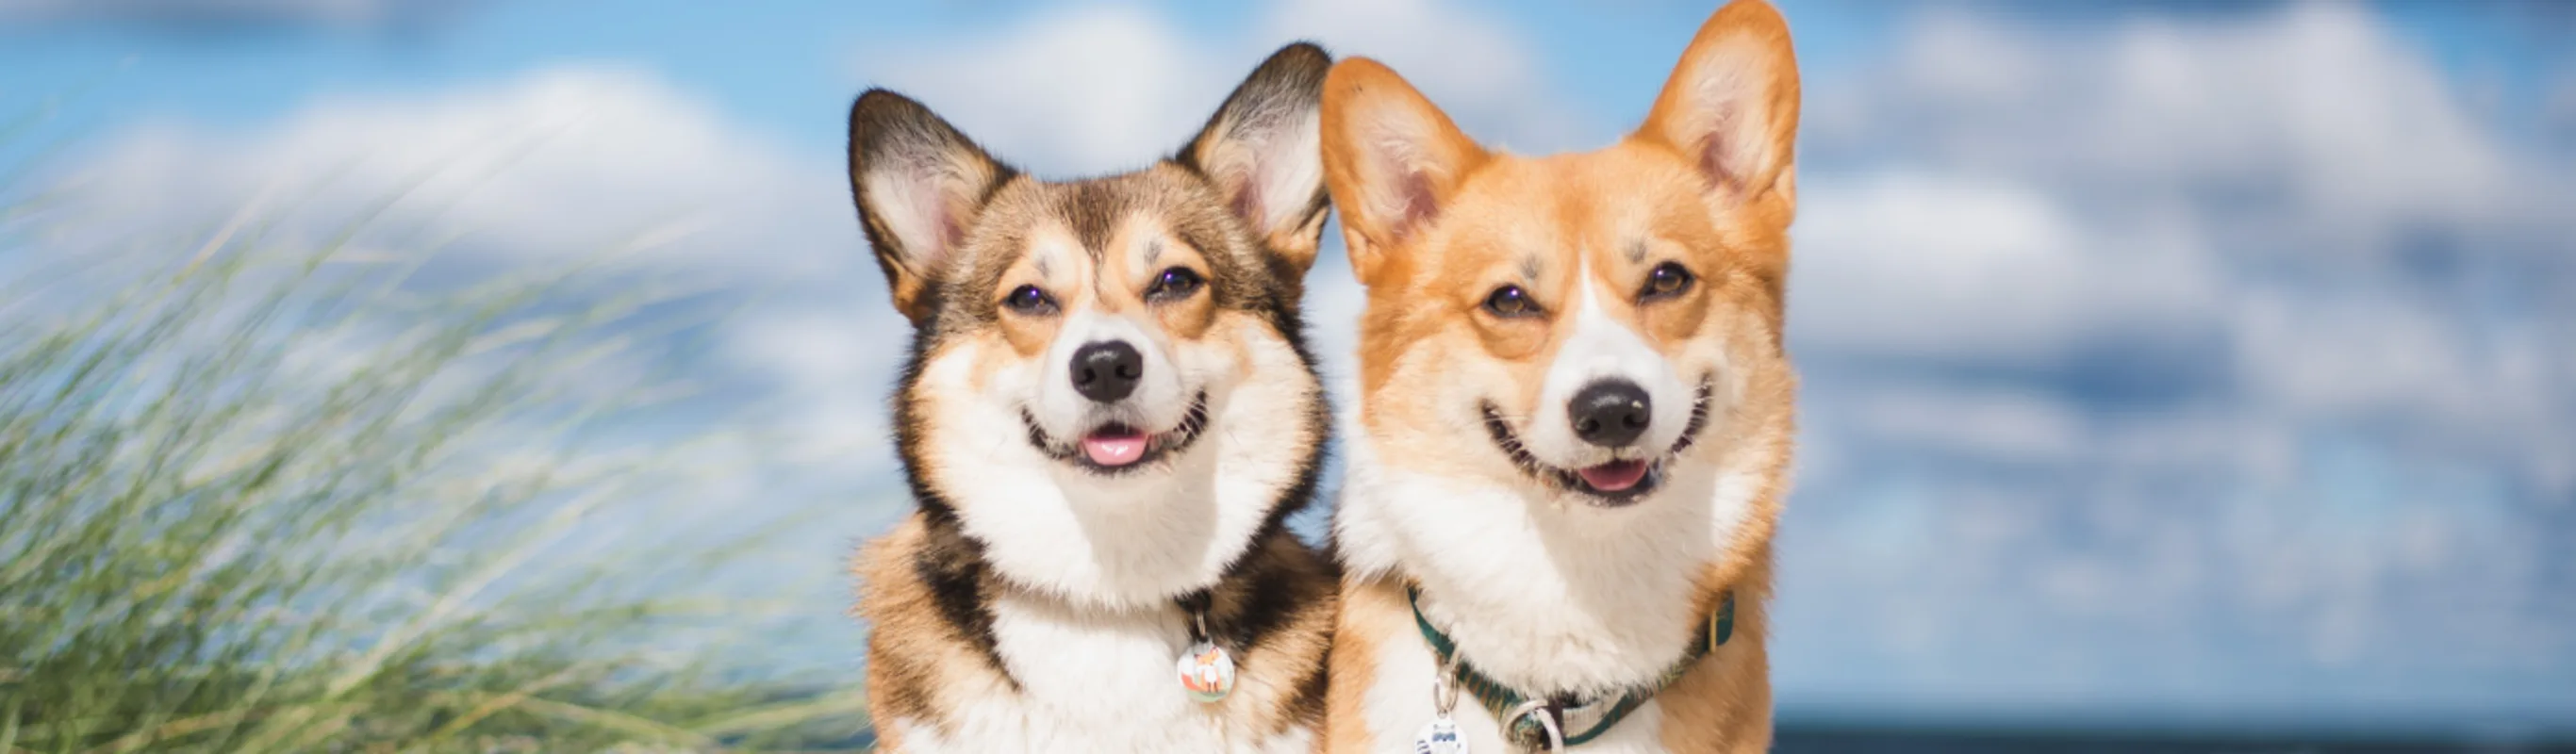 2 corgis sitting side by side at the beach with the ocean behind them